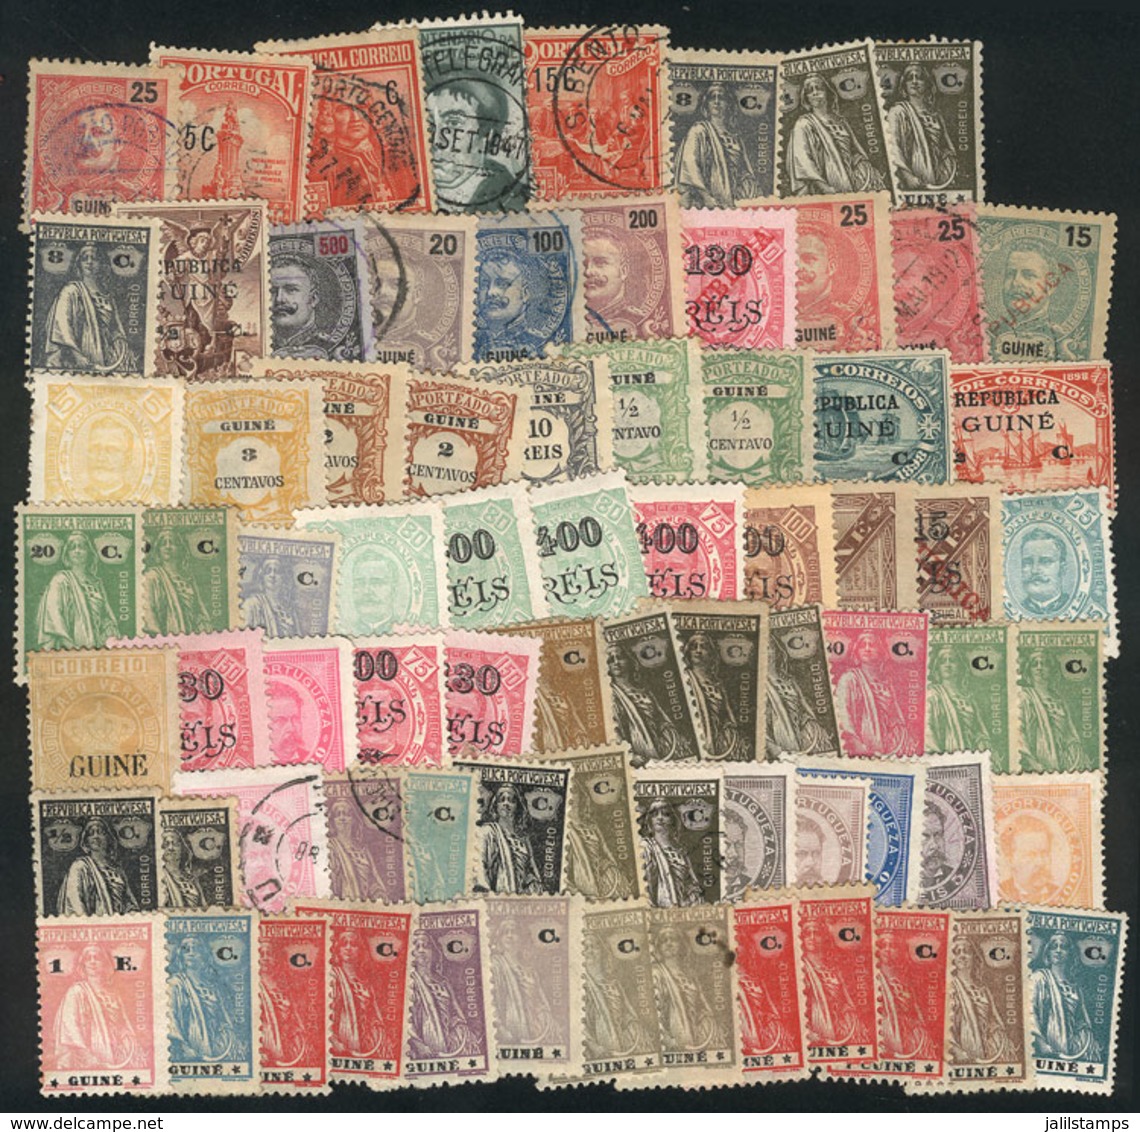 1378 PORTUGUESE GUINEA: Interesting Lot Of Many Old Stamps, Used Or Mint (they Can Be Without Gum), Fine General Quality - Portuguese Guinea